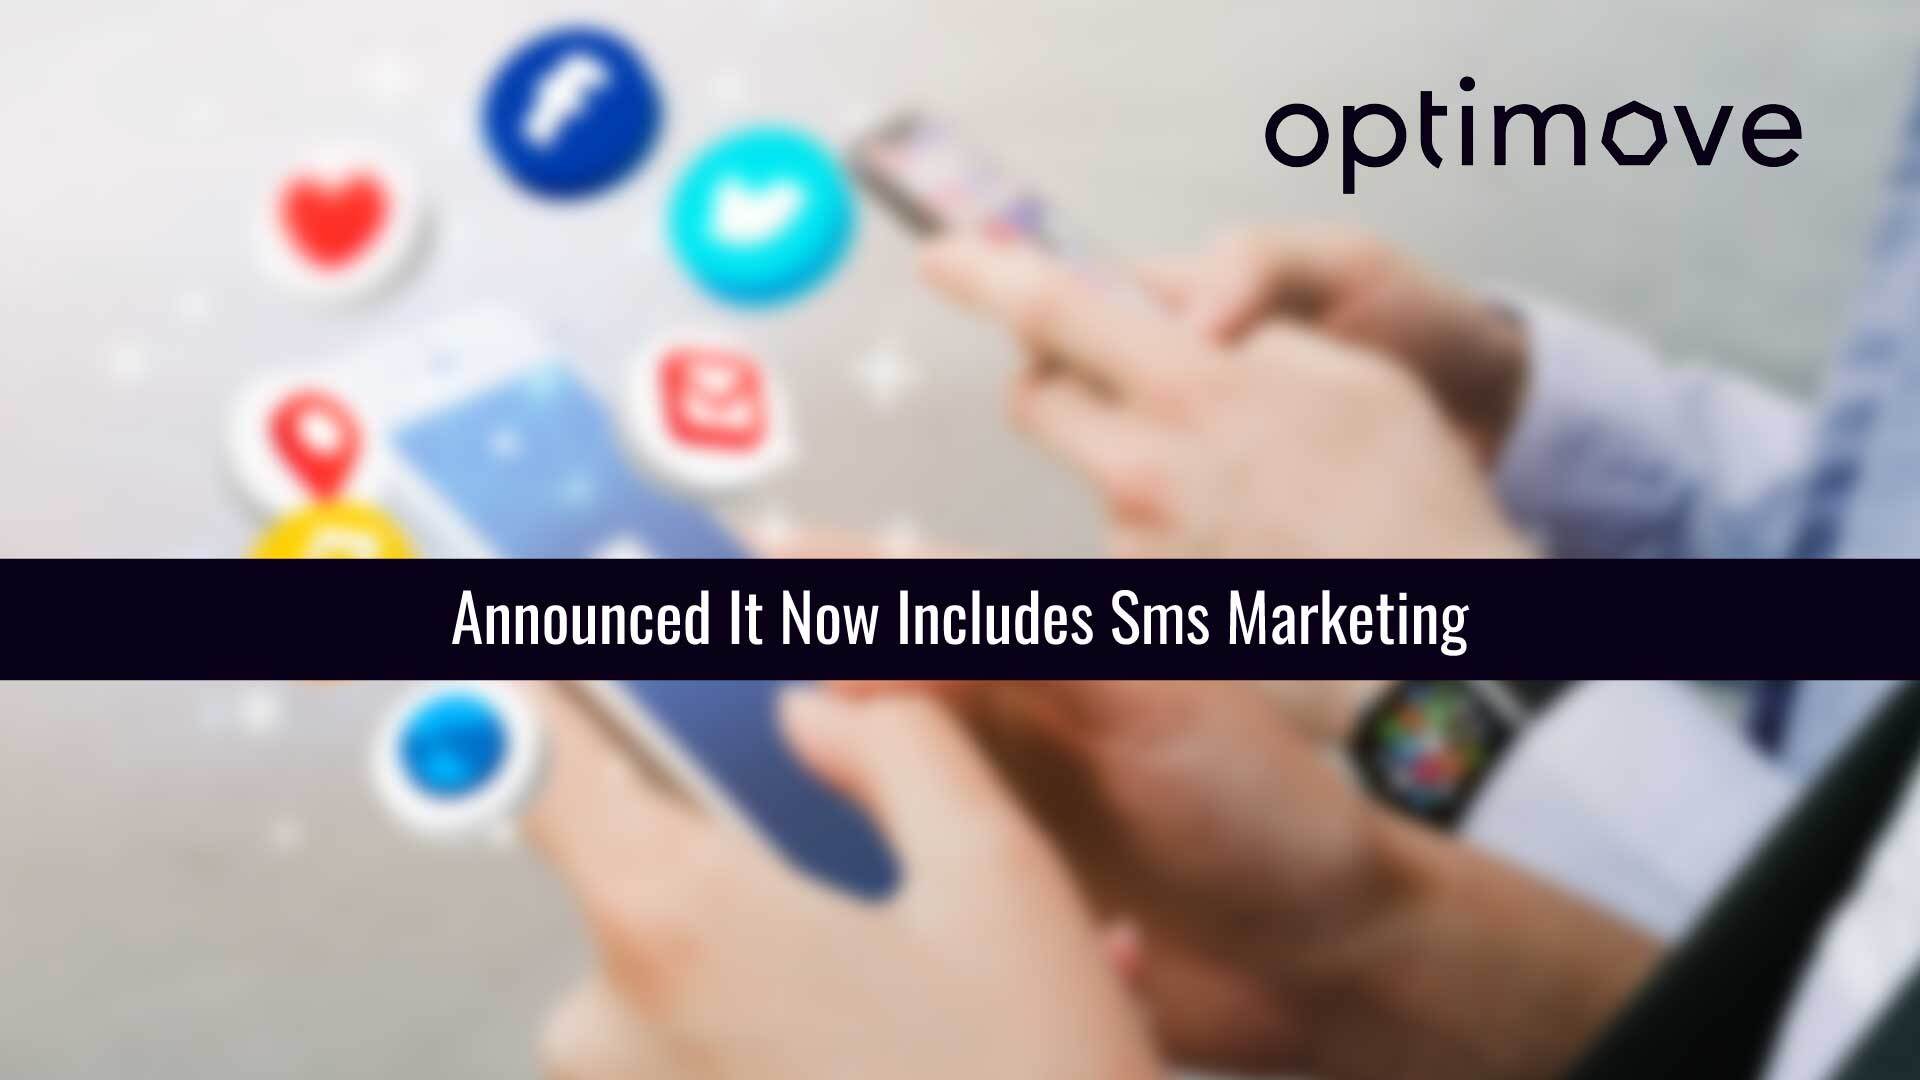 Optimove Expands Strategic Services Offering to Include SMS